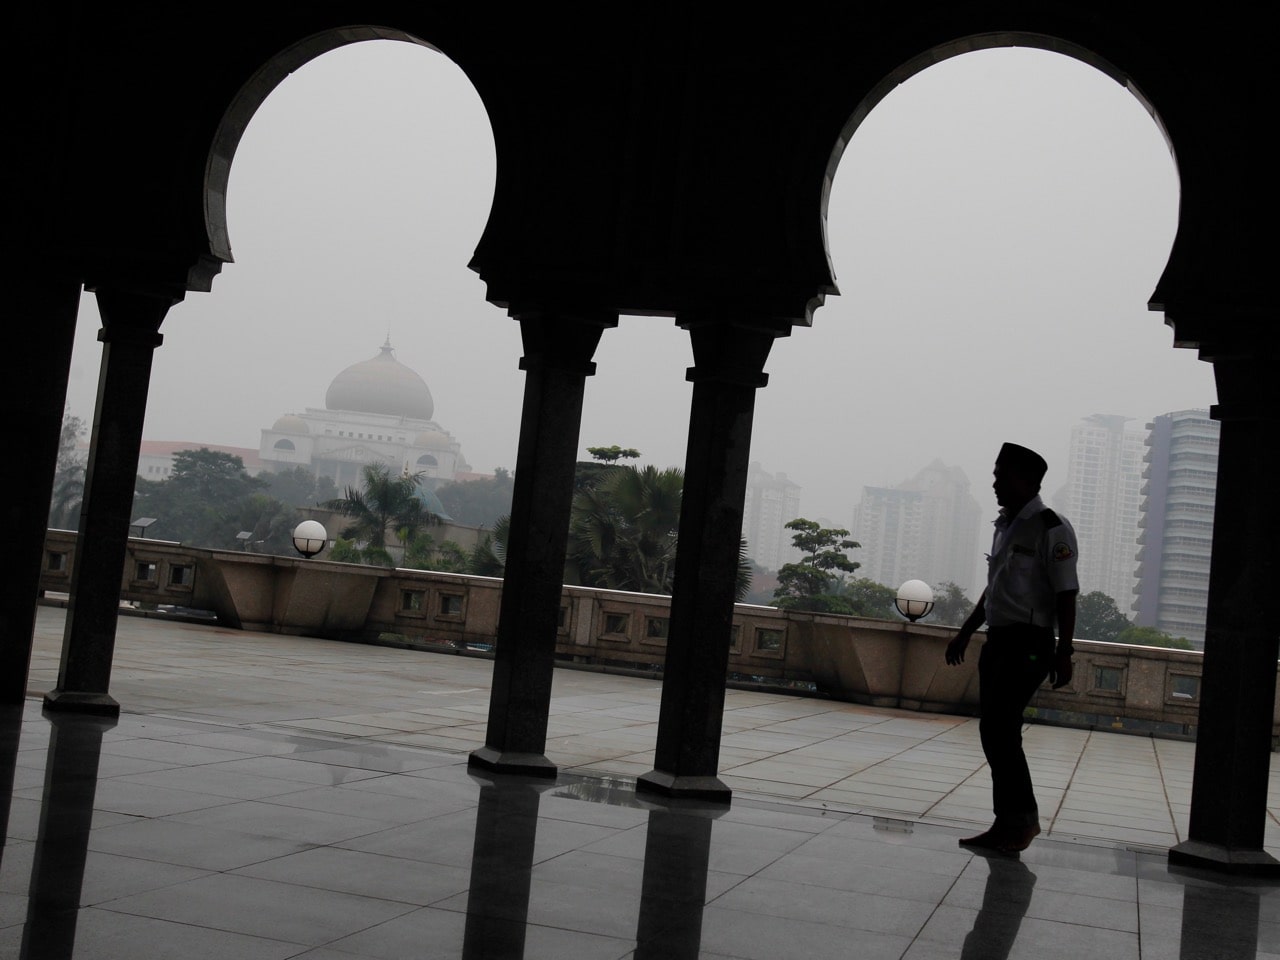 A man is silhouetted against Malaysia's high court building, left, shrouded with haze in Kuala Lumpur, 19 October 2015, AP Photo/Joshua Paul